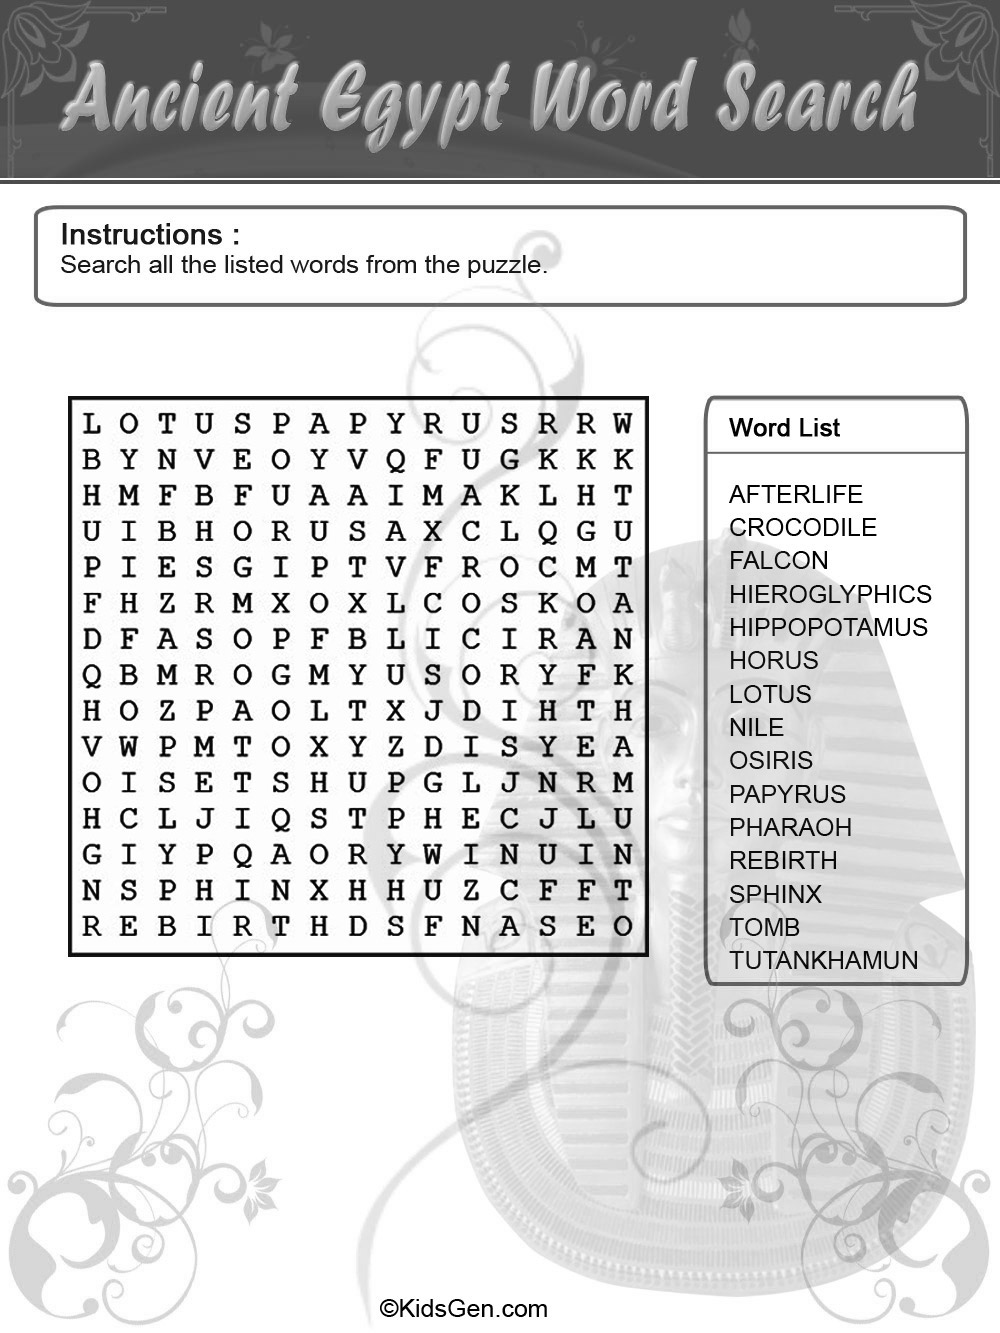 Ancient Egypt Black & White Word Search puzzle template